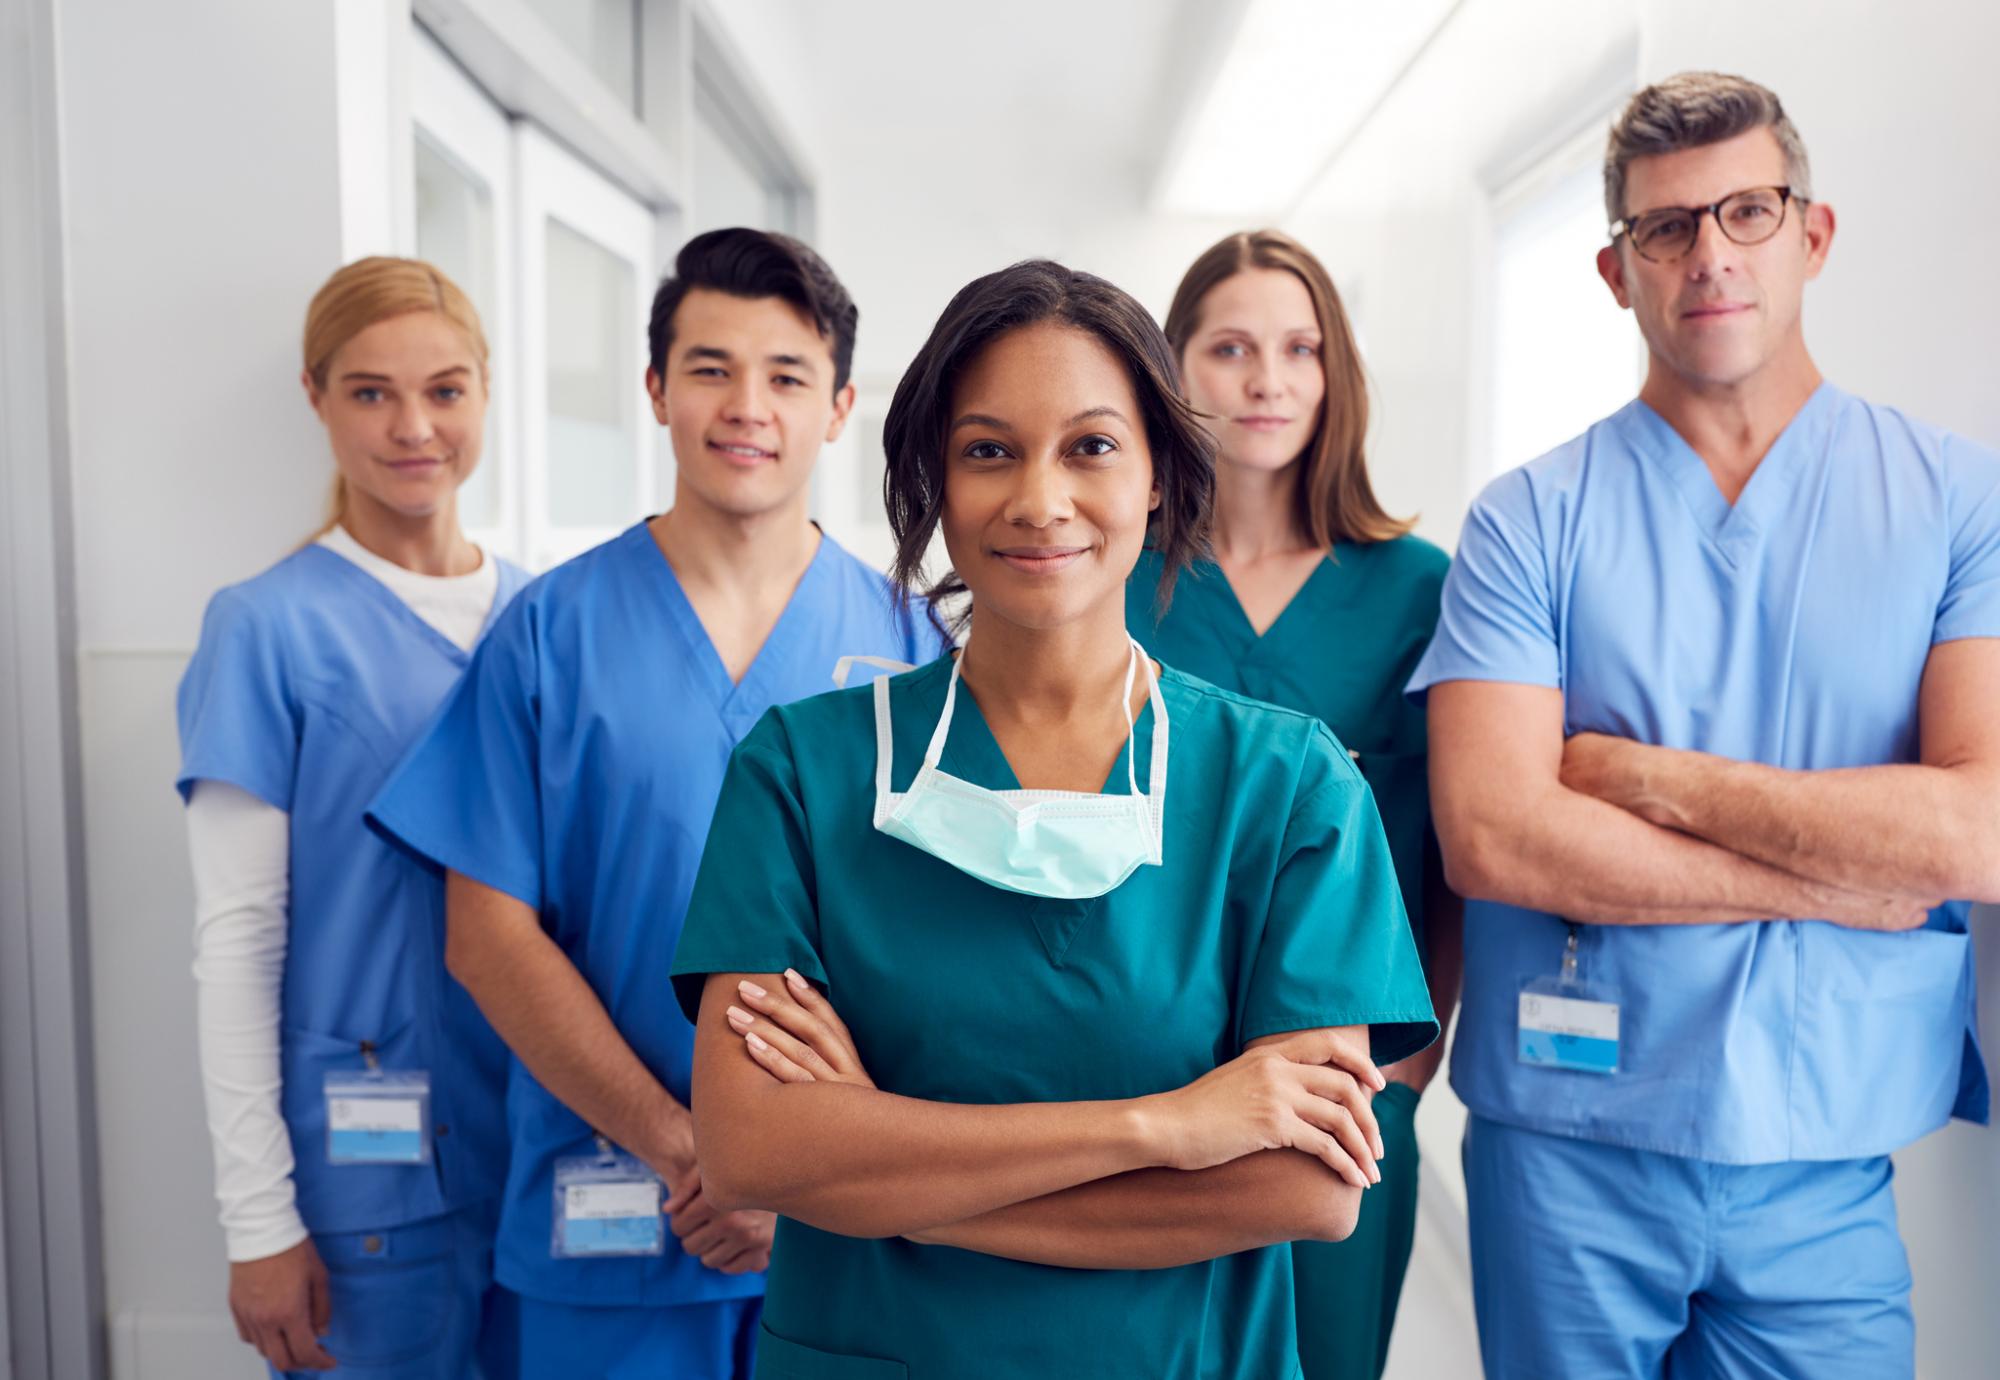 NHS Supply Chain to consult on standardised national NHS uniform